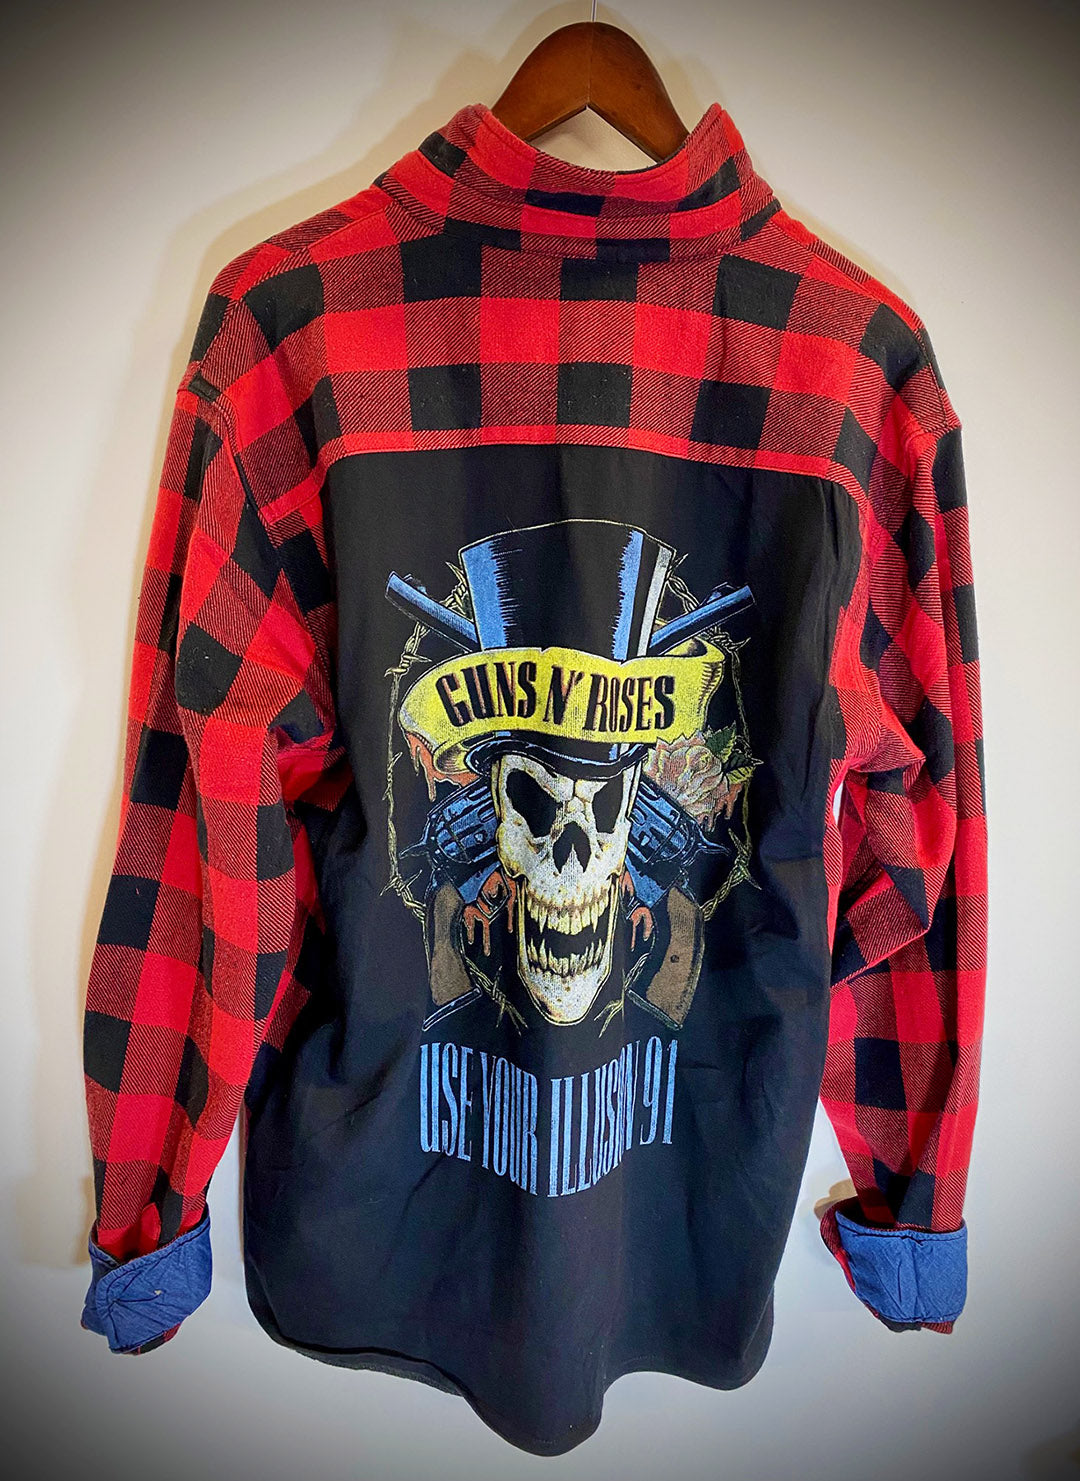 Guns n Roses '91 Use Your Illusion Vintage Rock Flannel Shirt